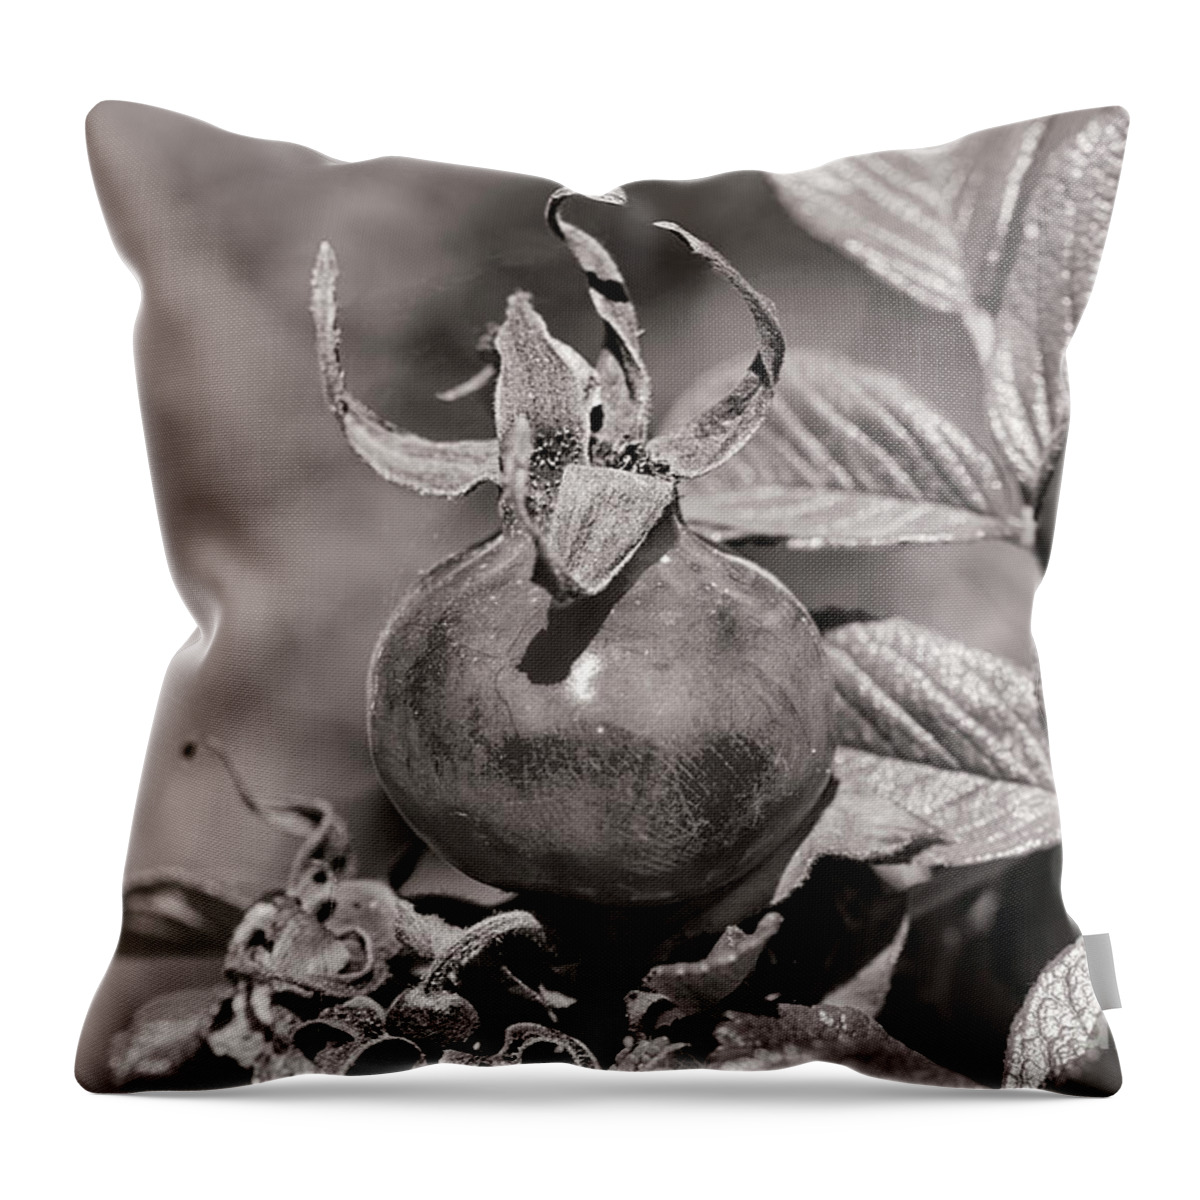 Rose Hip Throw Pillow featuring the photograph Rose Hip by Linda Lees